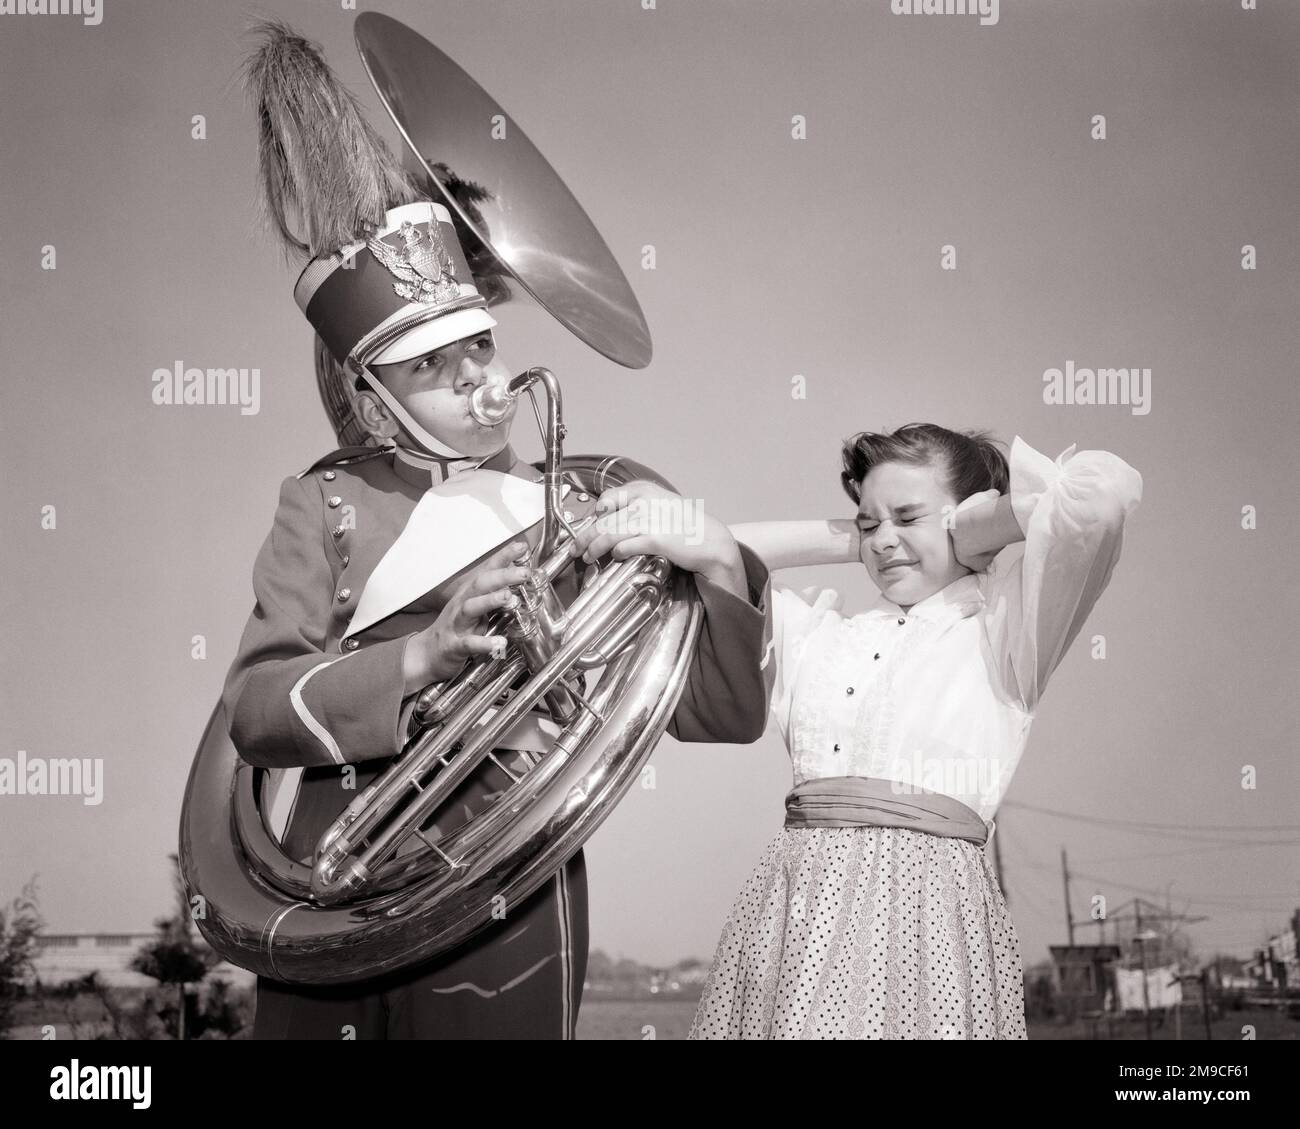 1950s TEEN BOY PLAYING TUBA LOUDLY WEARING BAND UNIFORM AND HAT YOUNG GIRL HOLDING HER HANDS OVER HER EARS FROM THE NOISE  - m2305 DEB001 HARS COMMUNICATION FRIEND COMIC NOISE LIFESTYLE SOUND SATISFACTION MUSICIAN ANNOYED FEMALES BROTHERS COPY SPACE FRIENDSHIP HALF-LENGTH INSPIRATION MALES TEENAGE GIRL TEENAGE BOY BRASS SIBLINGS SISTERS B&W HUMOROUS AND EXCITEMENT LOUD LOW ANGLE RECREATION COMICAL PRIDE SIBLING MUSICAL INSTRUMENT TUBA CONNECTION CONCEPTUAL COMEDY FRIENDLY SUPPORT DEB001 ANNOYANCE GROWTH JUVENILES LOUDLY NOISES PRE-TEEN PRE-TEEN BOY PRE-TEEN GIRL TOGETHERNESS YOUNGSTER Stock Photo